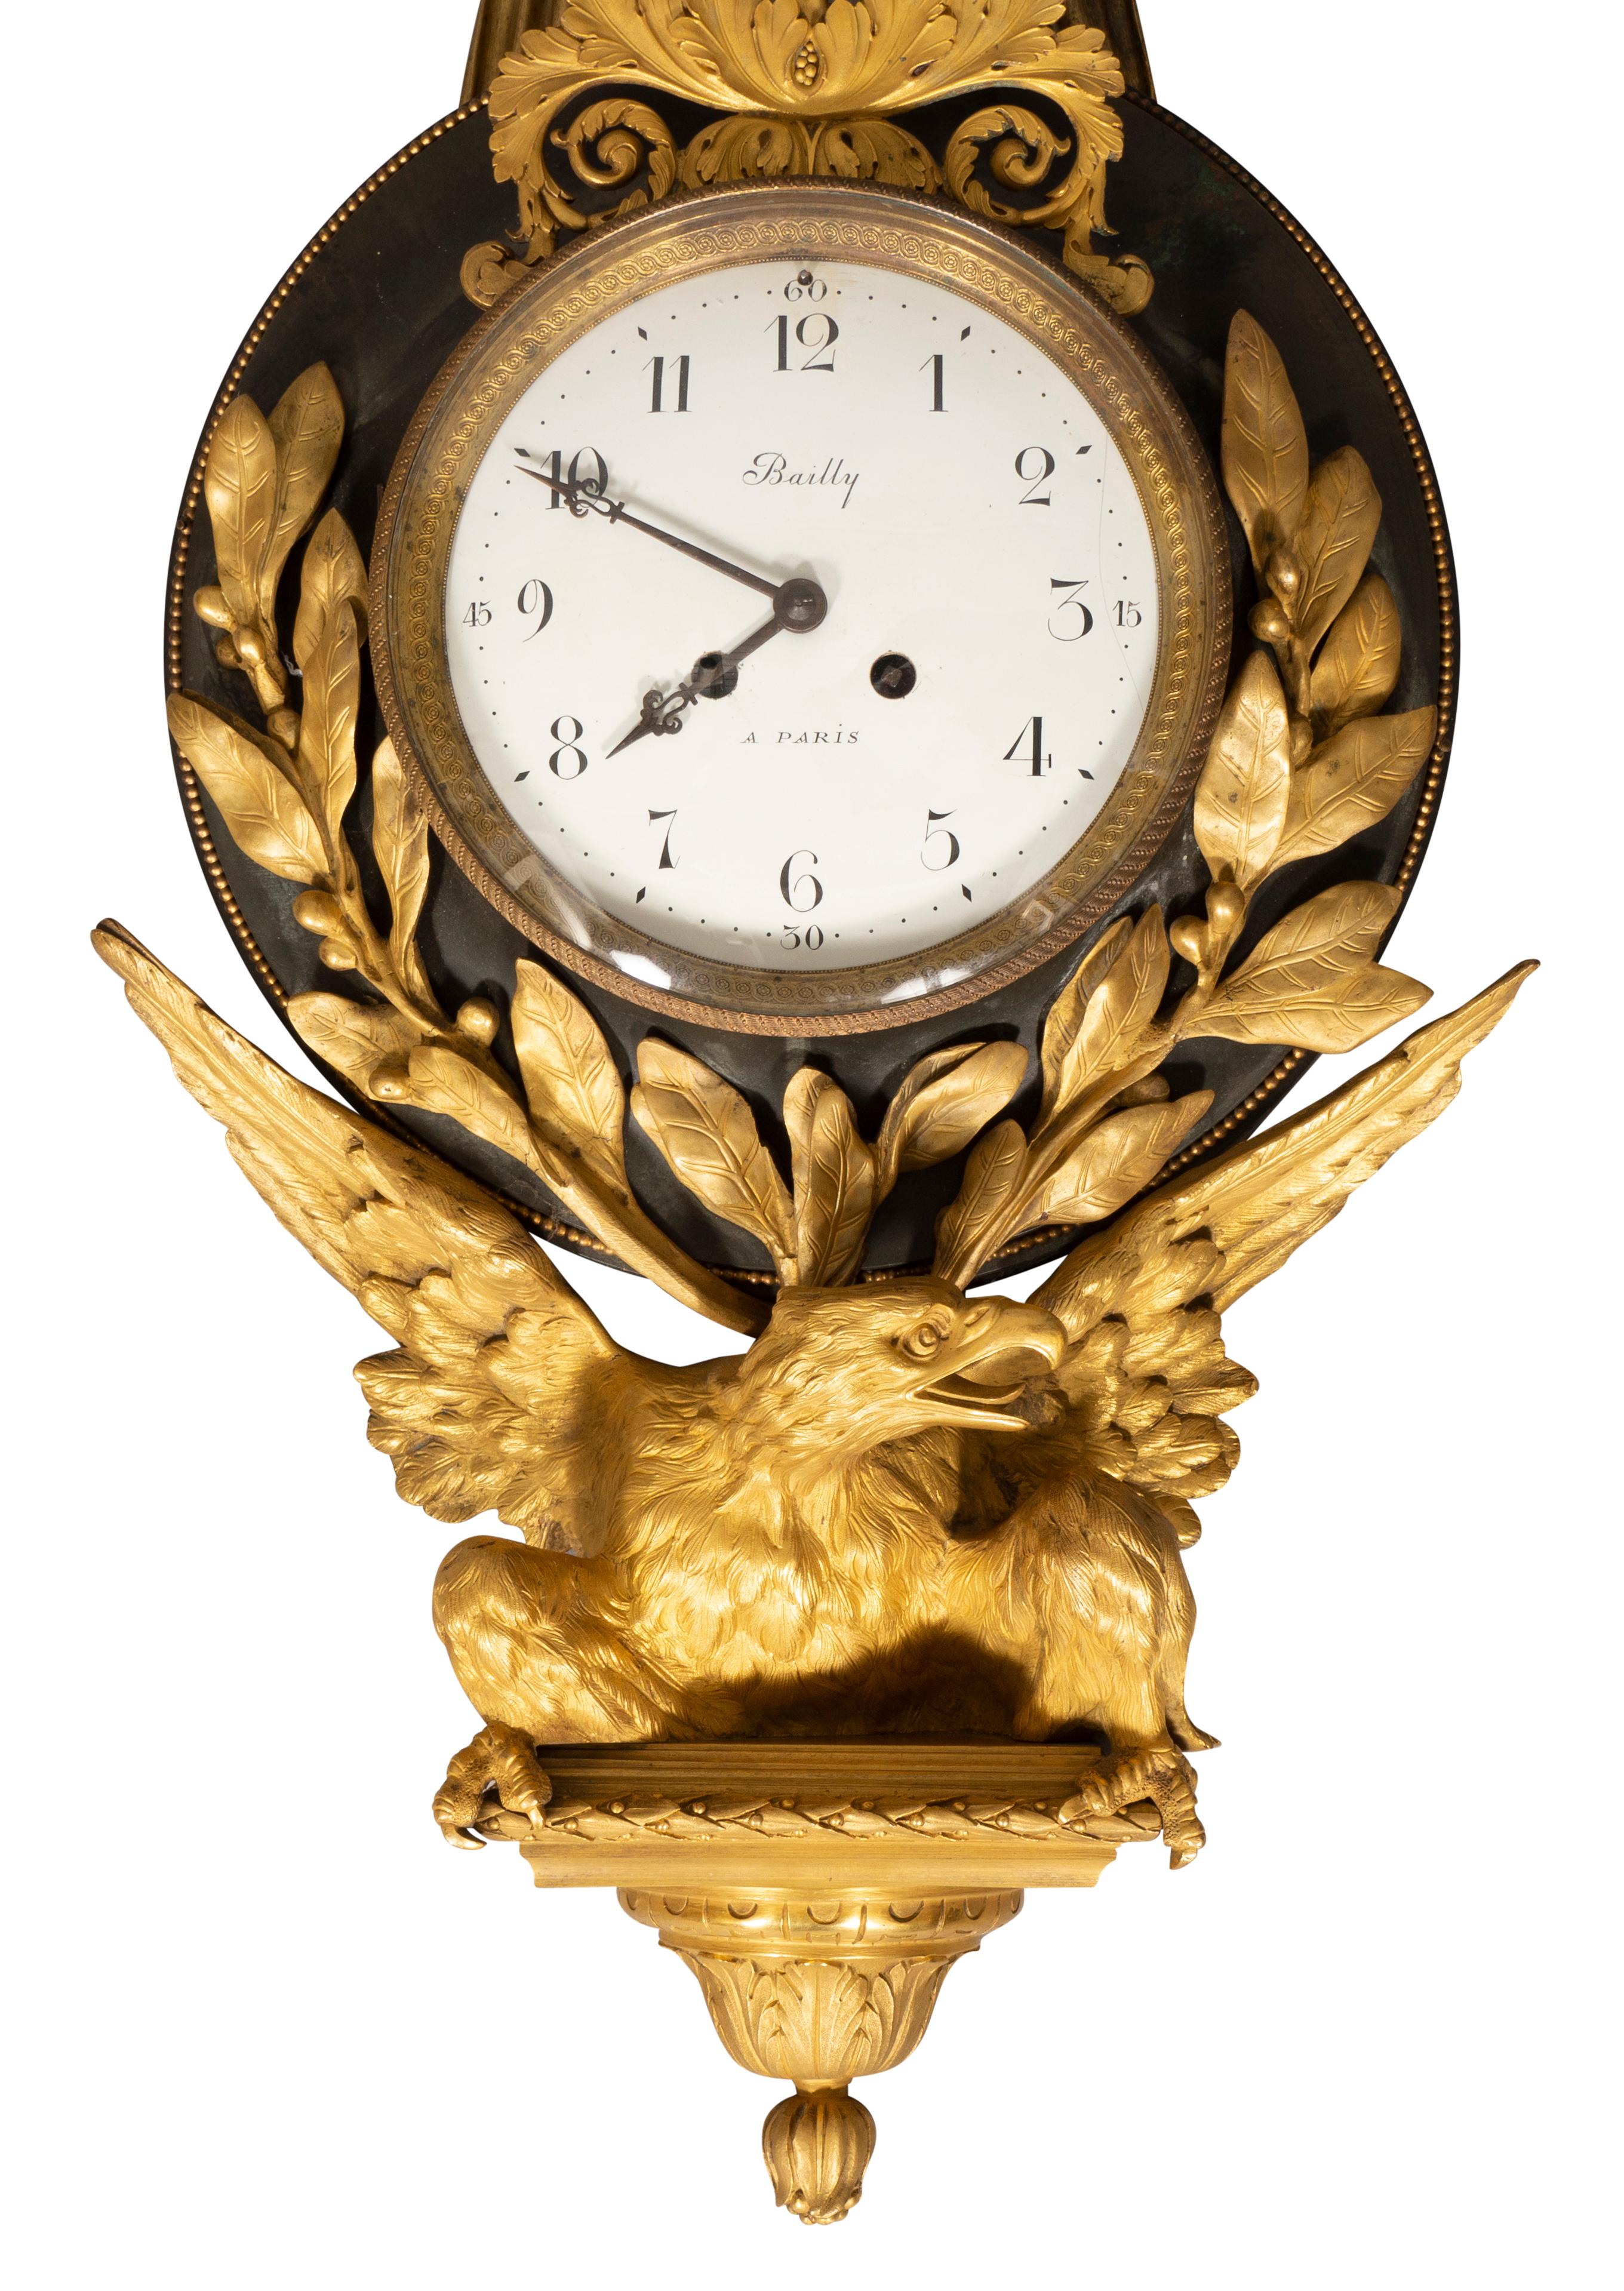 Empire Bronze and Ormolu Cartel Clock by Bailly, Paris For Sale 9